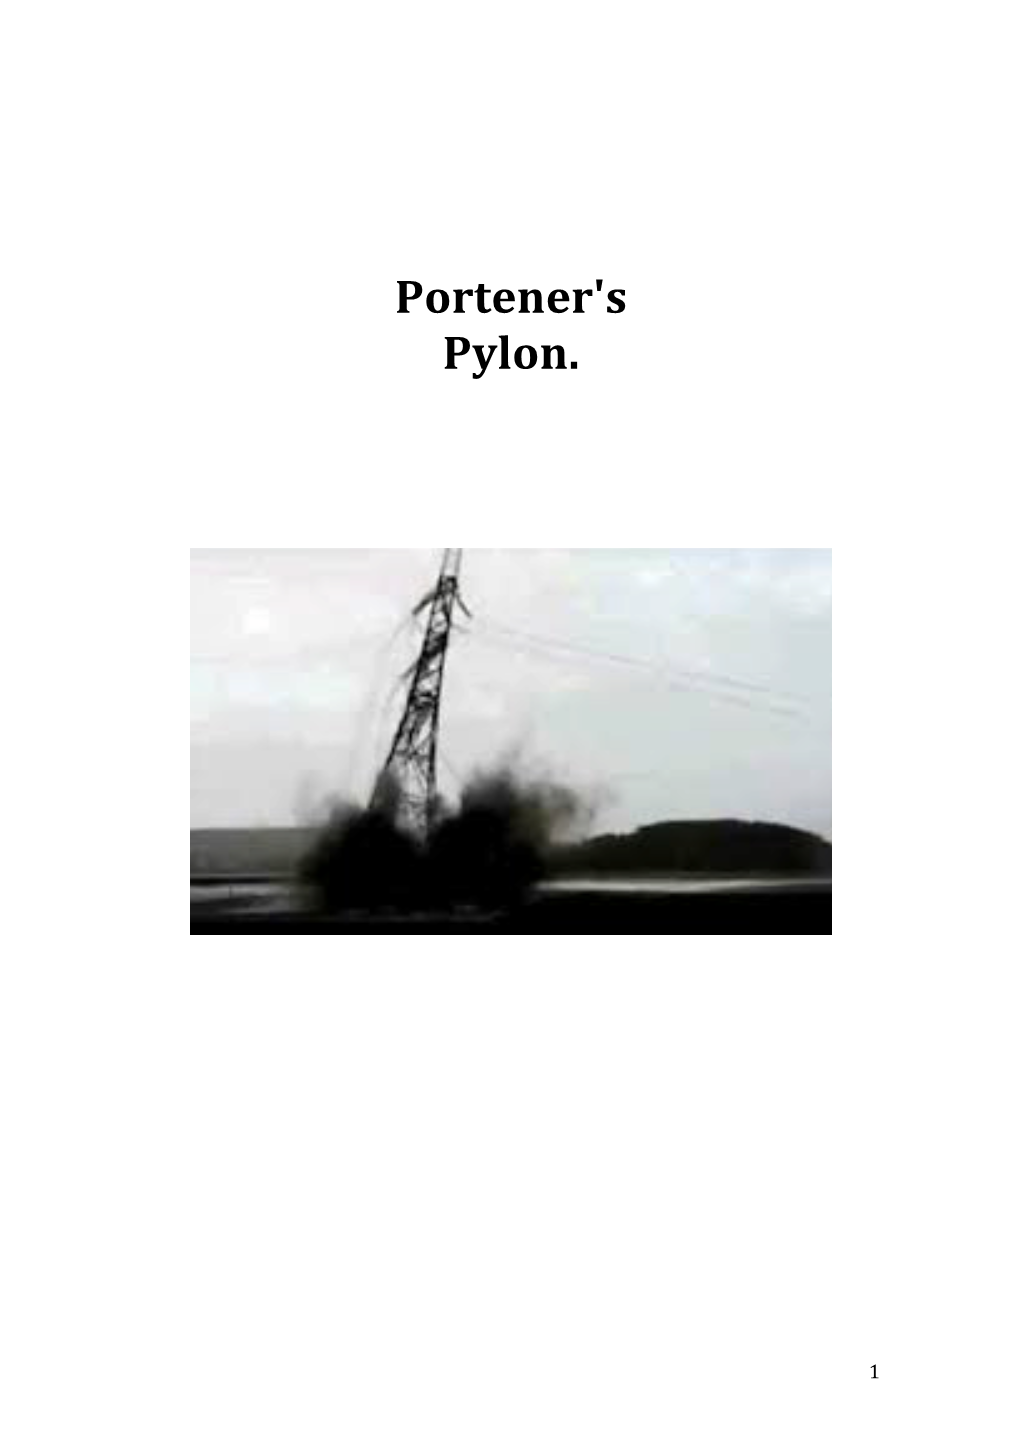 Gus Porteners Pylon Story Completed